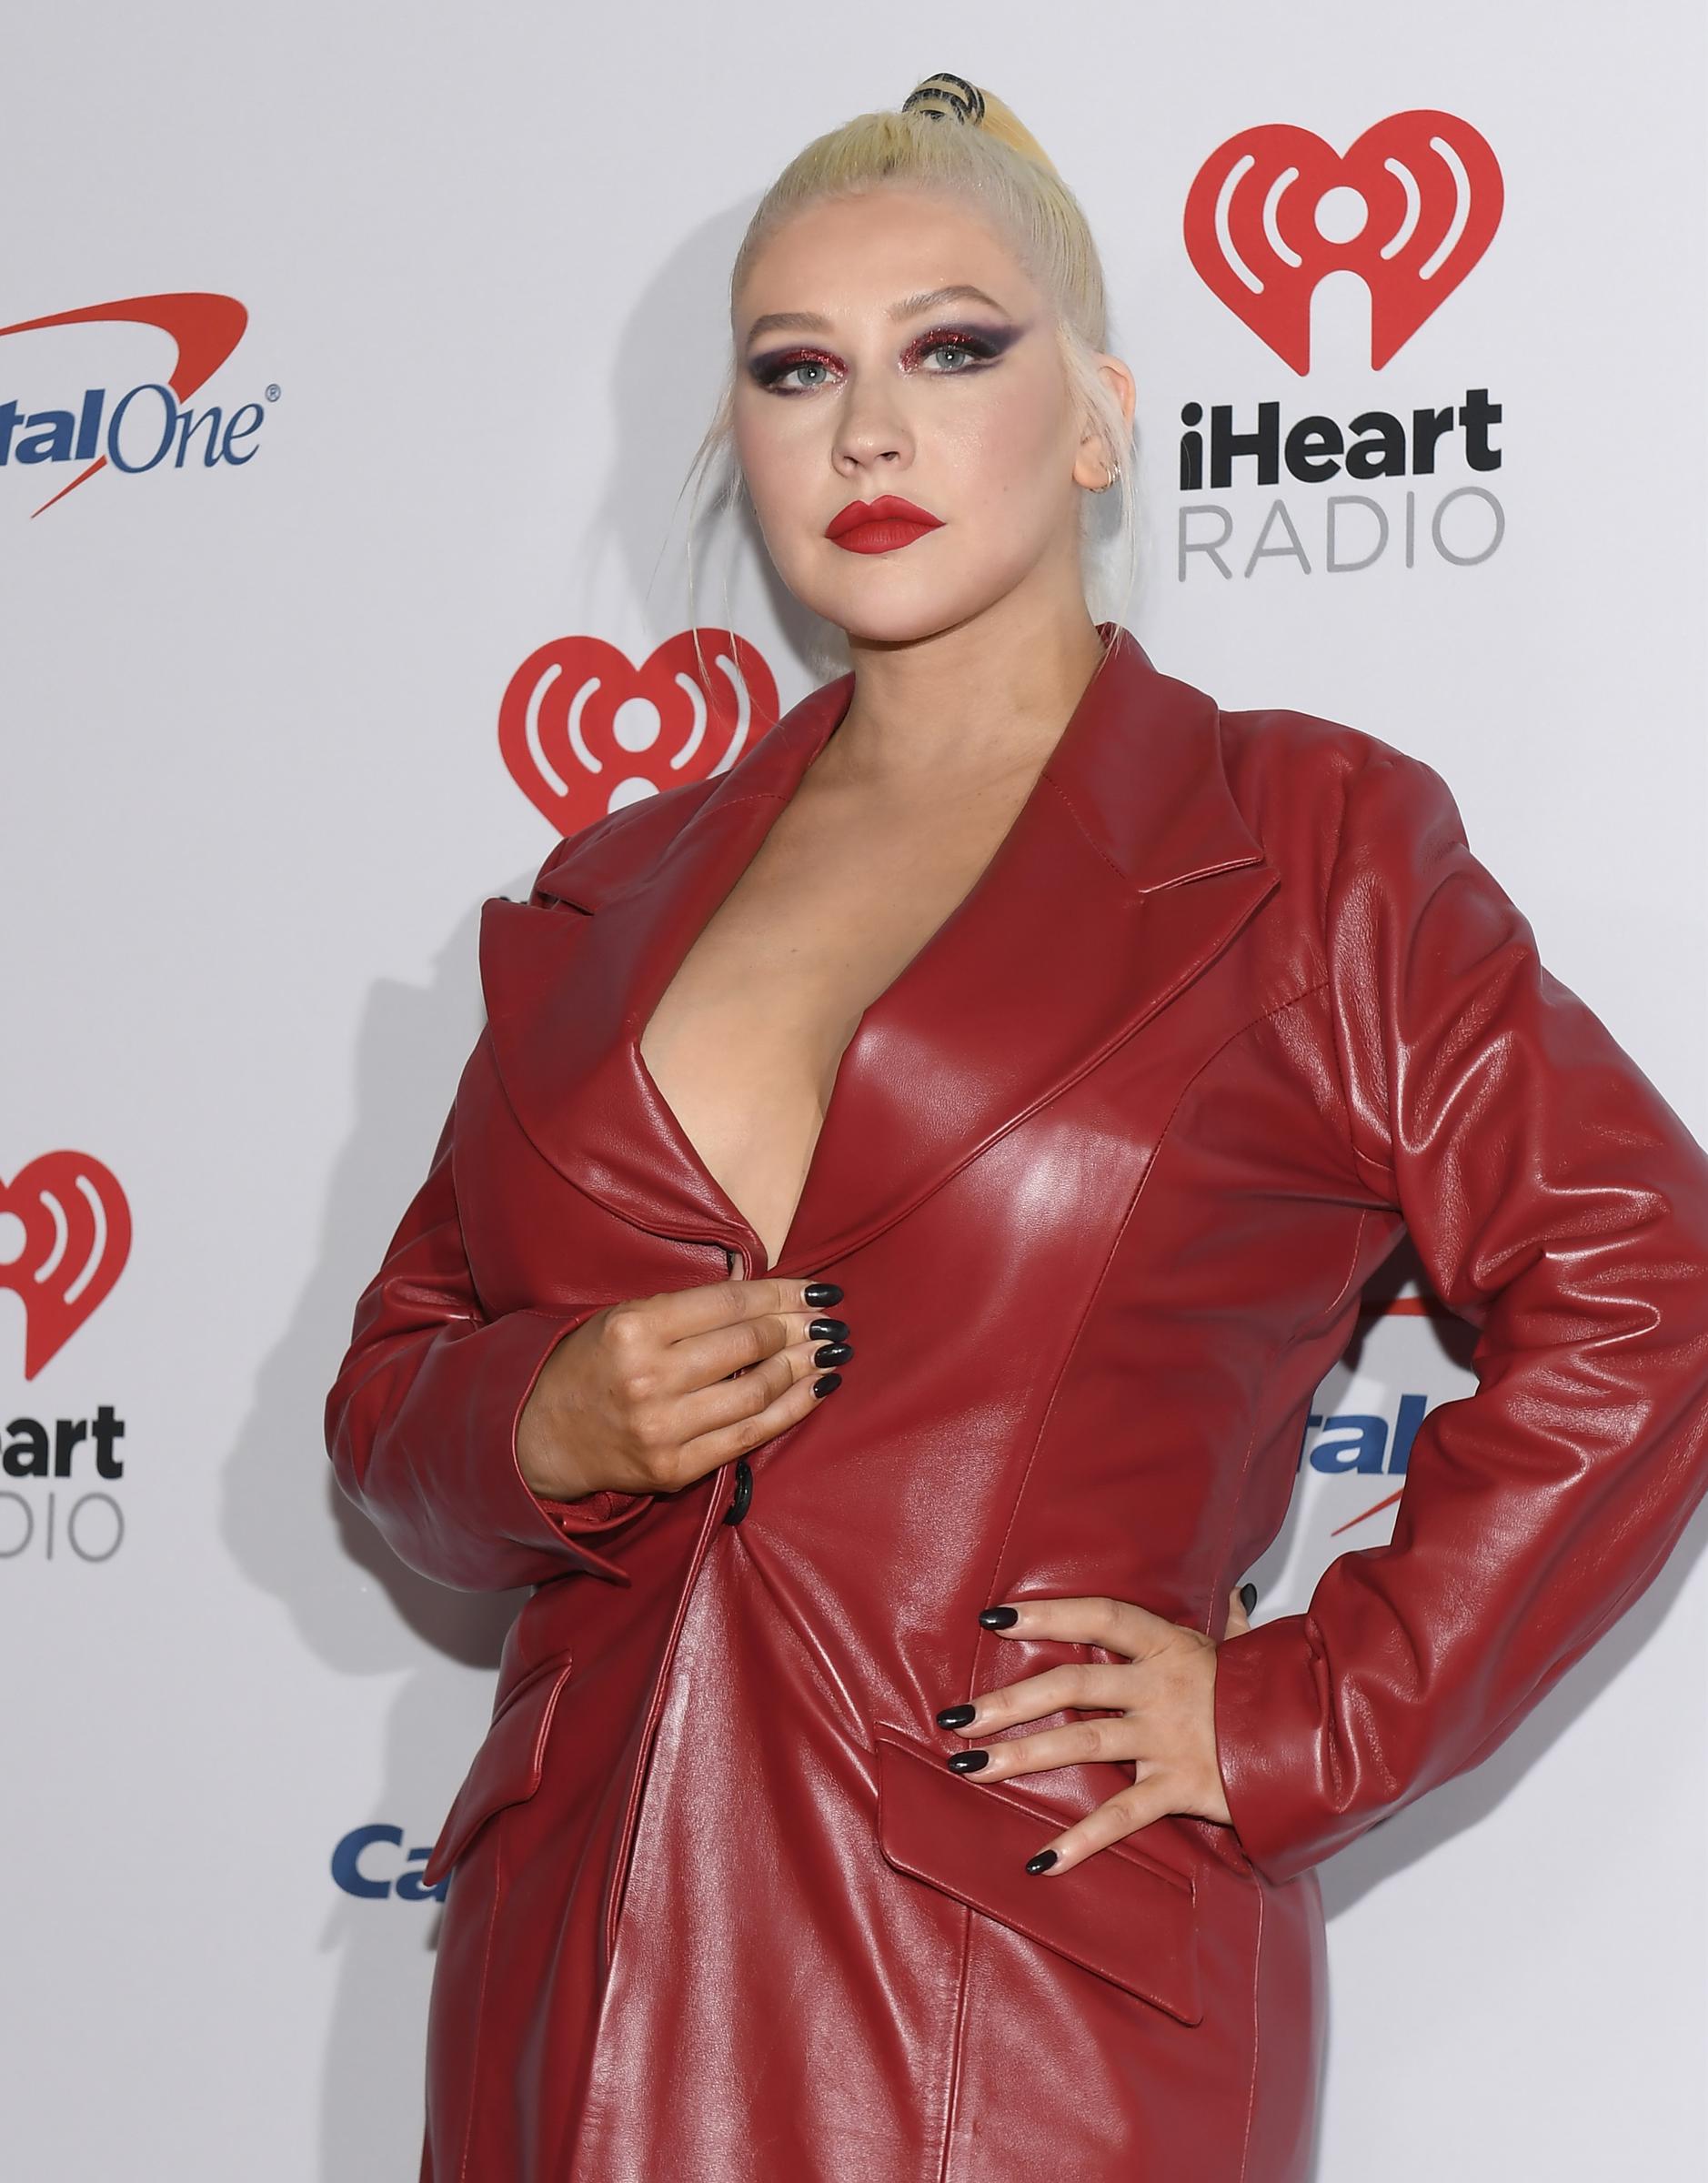 Christina Aguilera attends the iHeartRadio Music Festival and Daytime Stage at T-Mobile Arena on September 20, 2019 in Las Vegas, Nevada. | Source: Getty Images